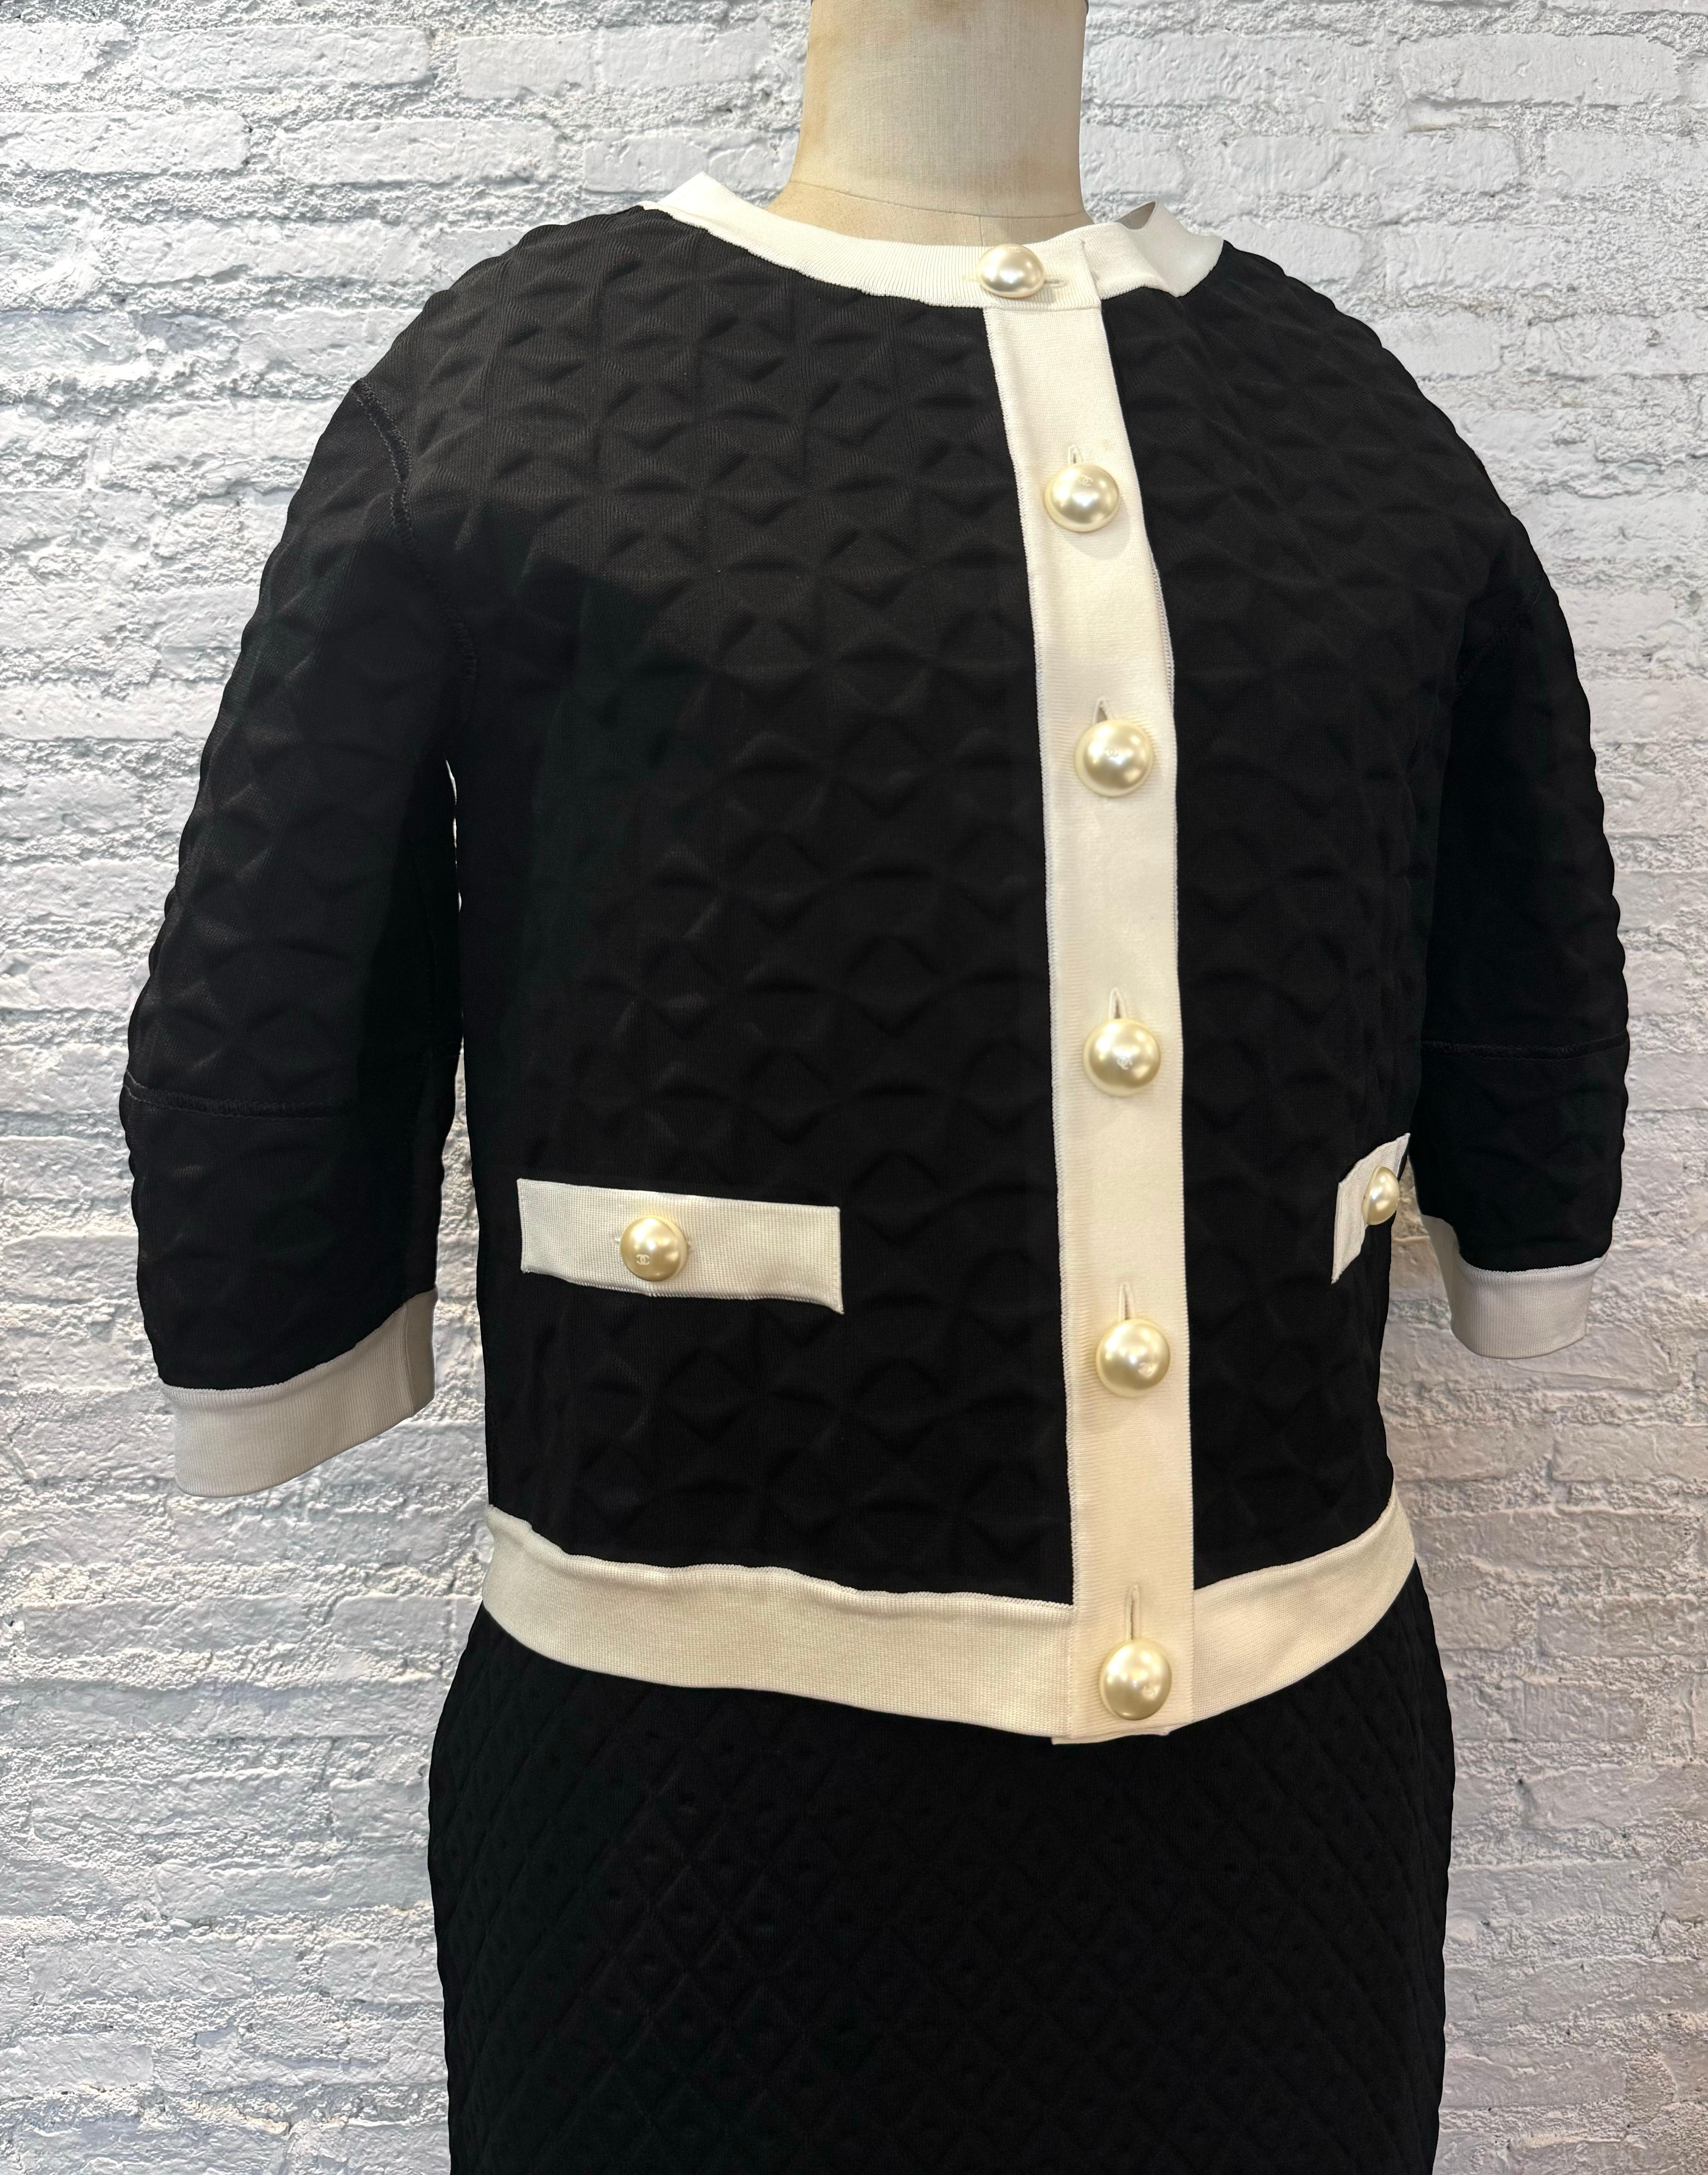 This 2013 Spring Summer CHANEL balloon jacket is crafted of black rayon/polyester textile pressed in windmill pattern with white trims featuring faux pearl buttons and two front faux pockets. This top is from 2013 Spring Summer Powered by Renewable